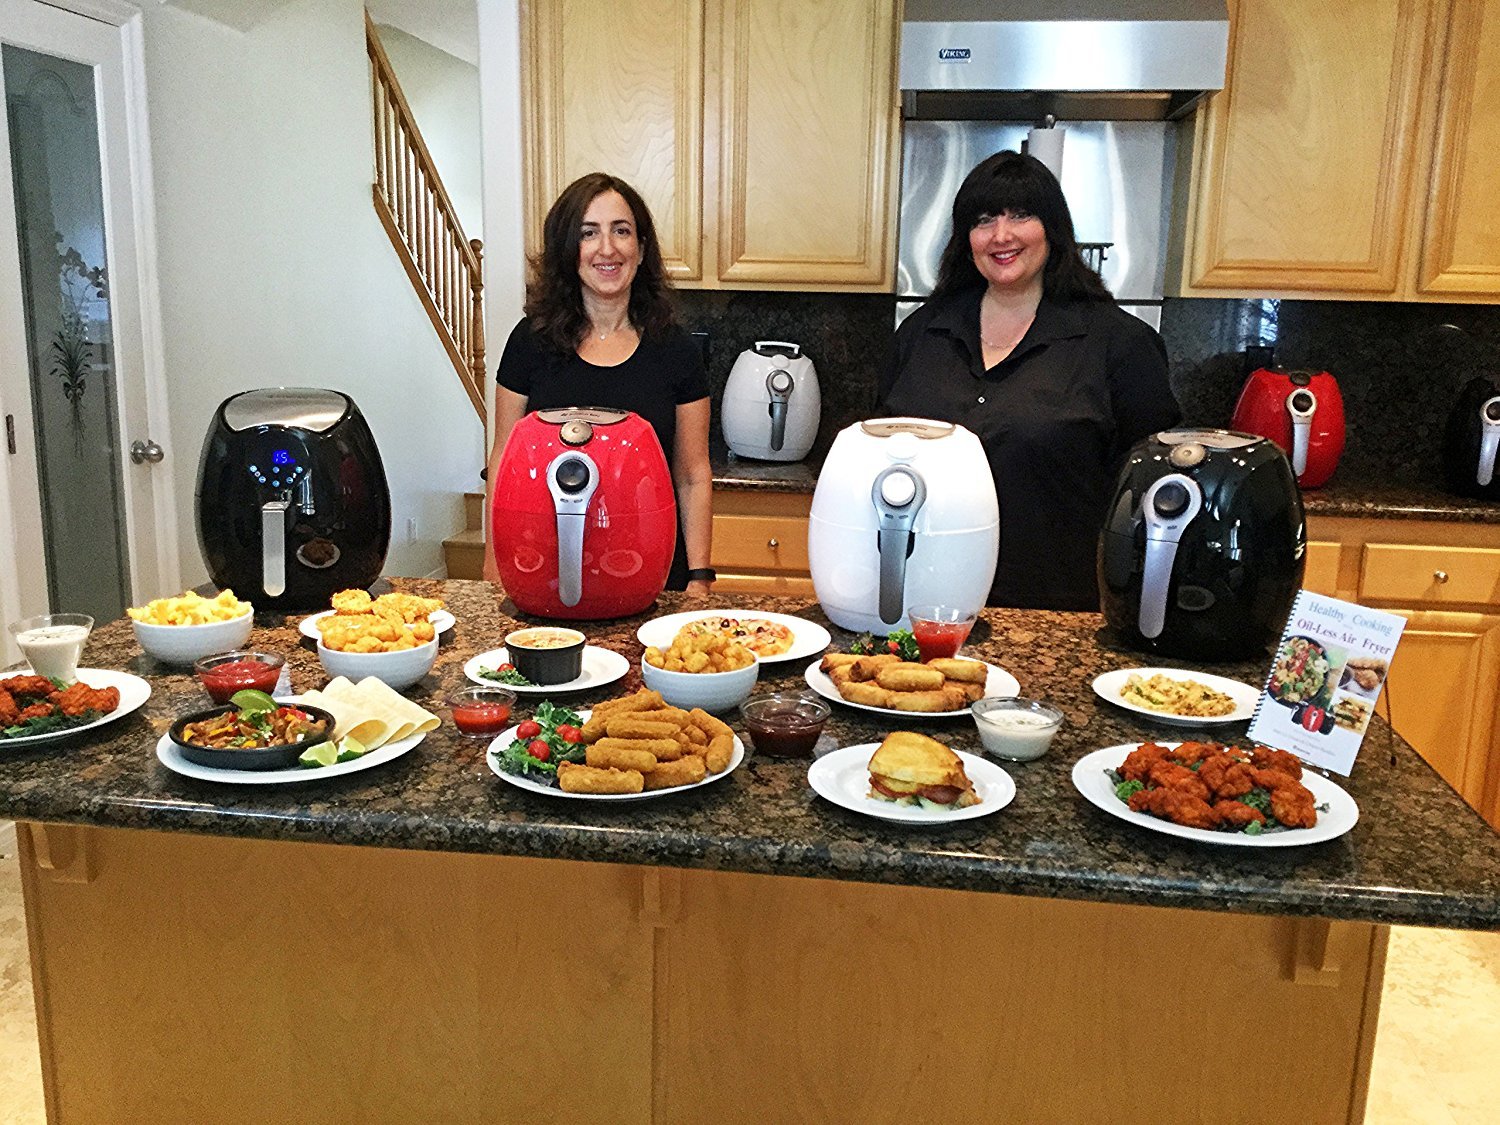 Features About the Avalon 100B Air fryer